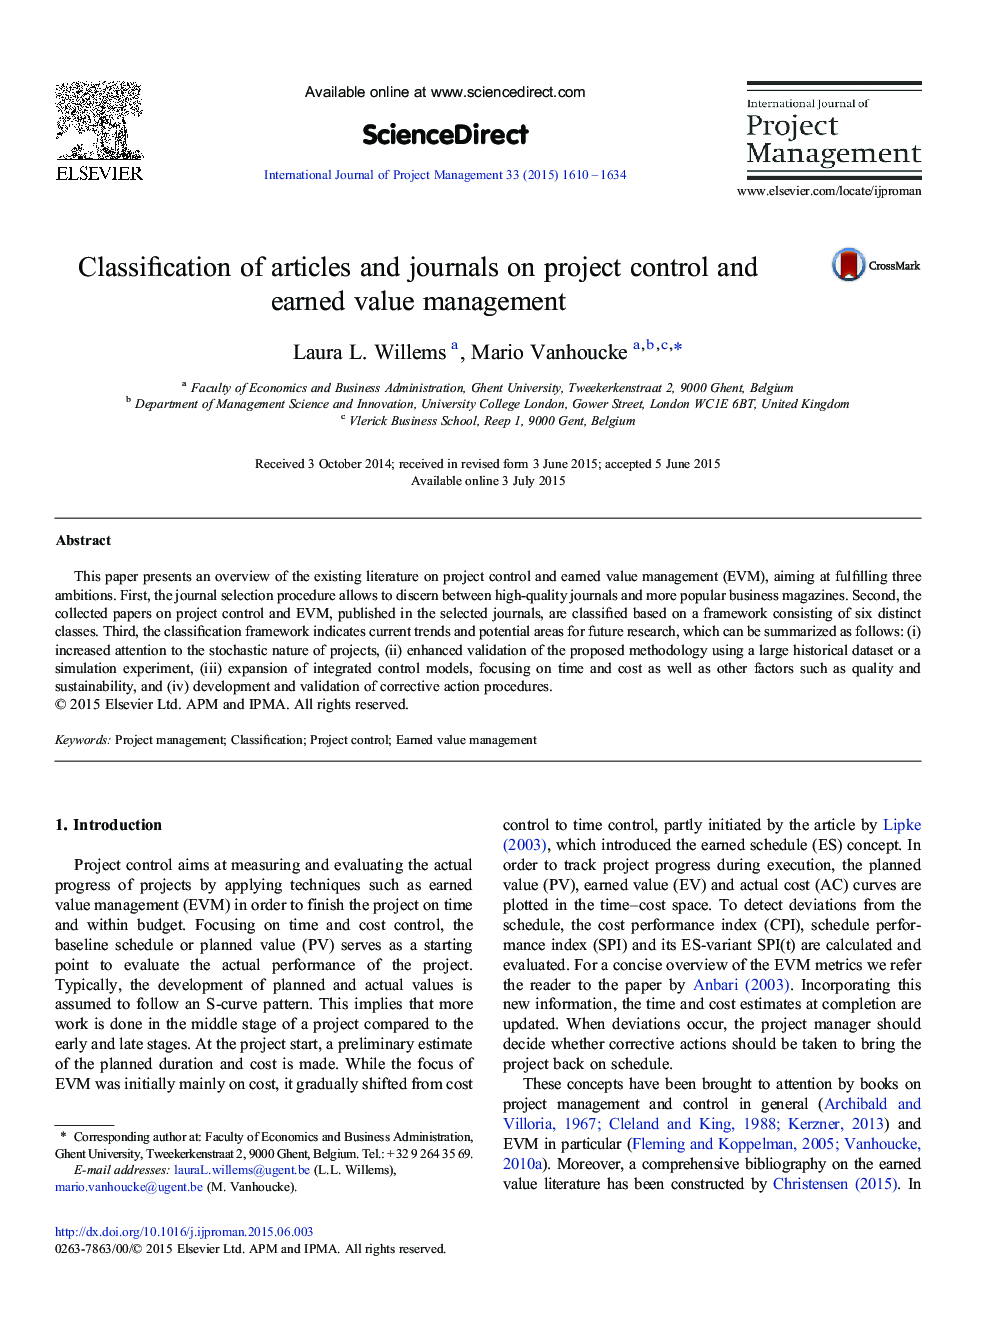 Classification of articles and journals on project control and earned value management